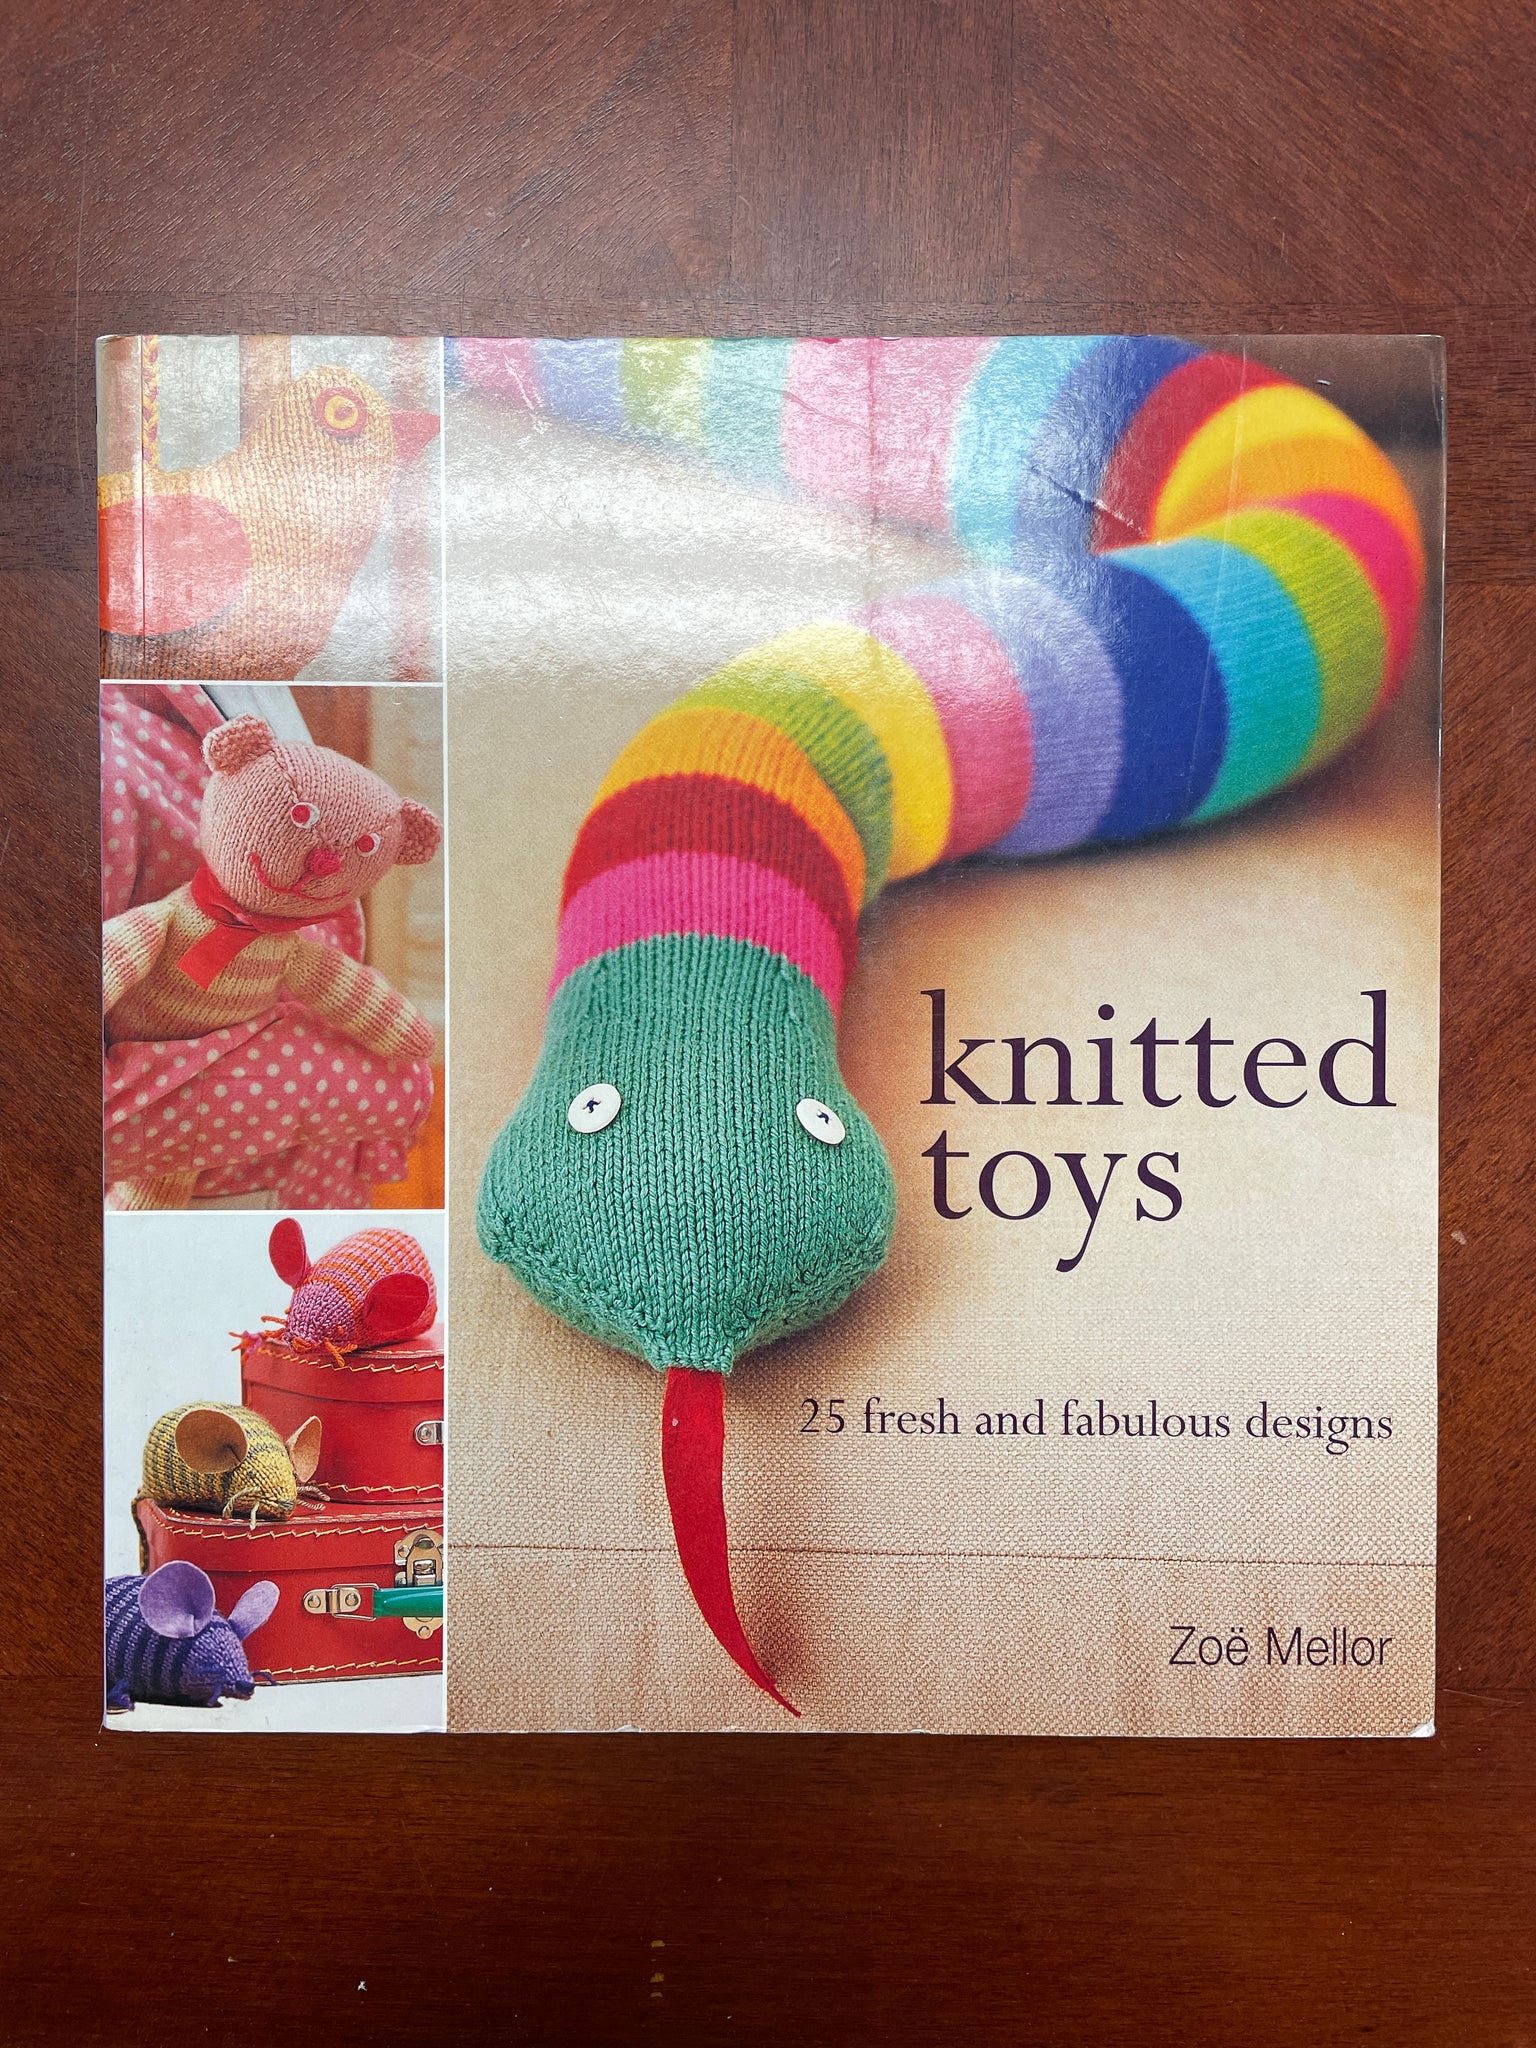 2006 Knitting Book - "Knitted Toys"